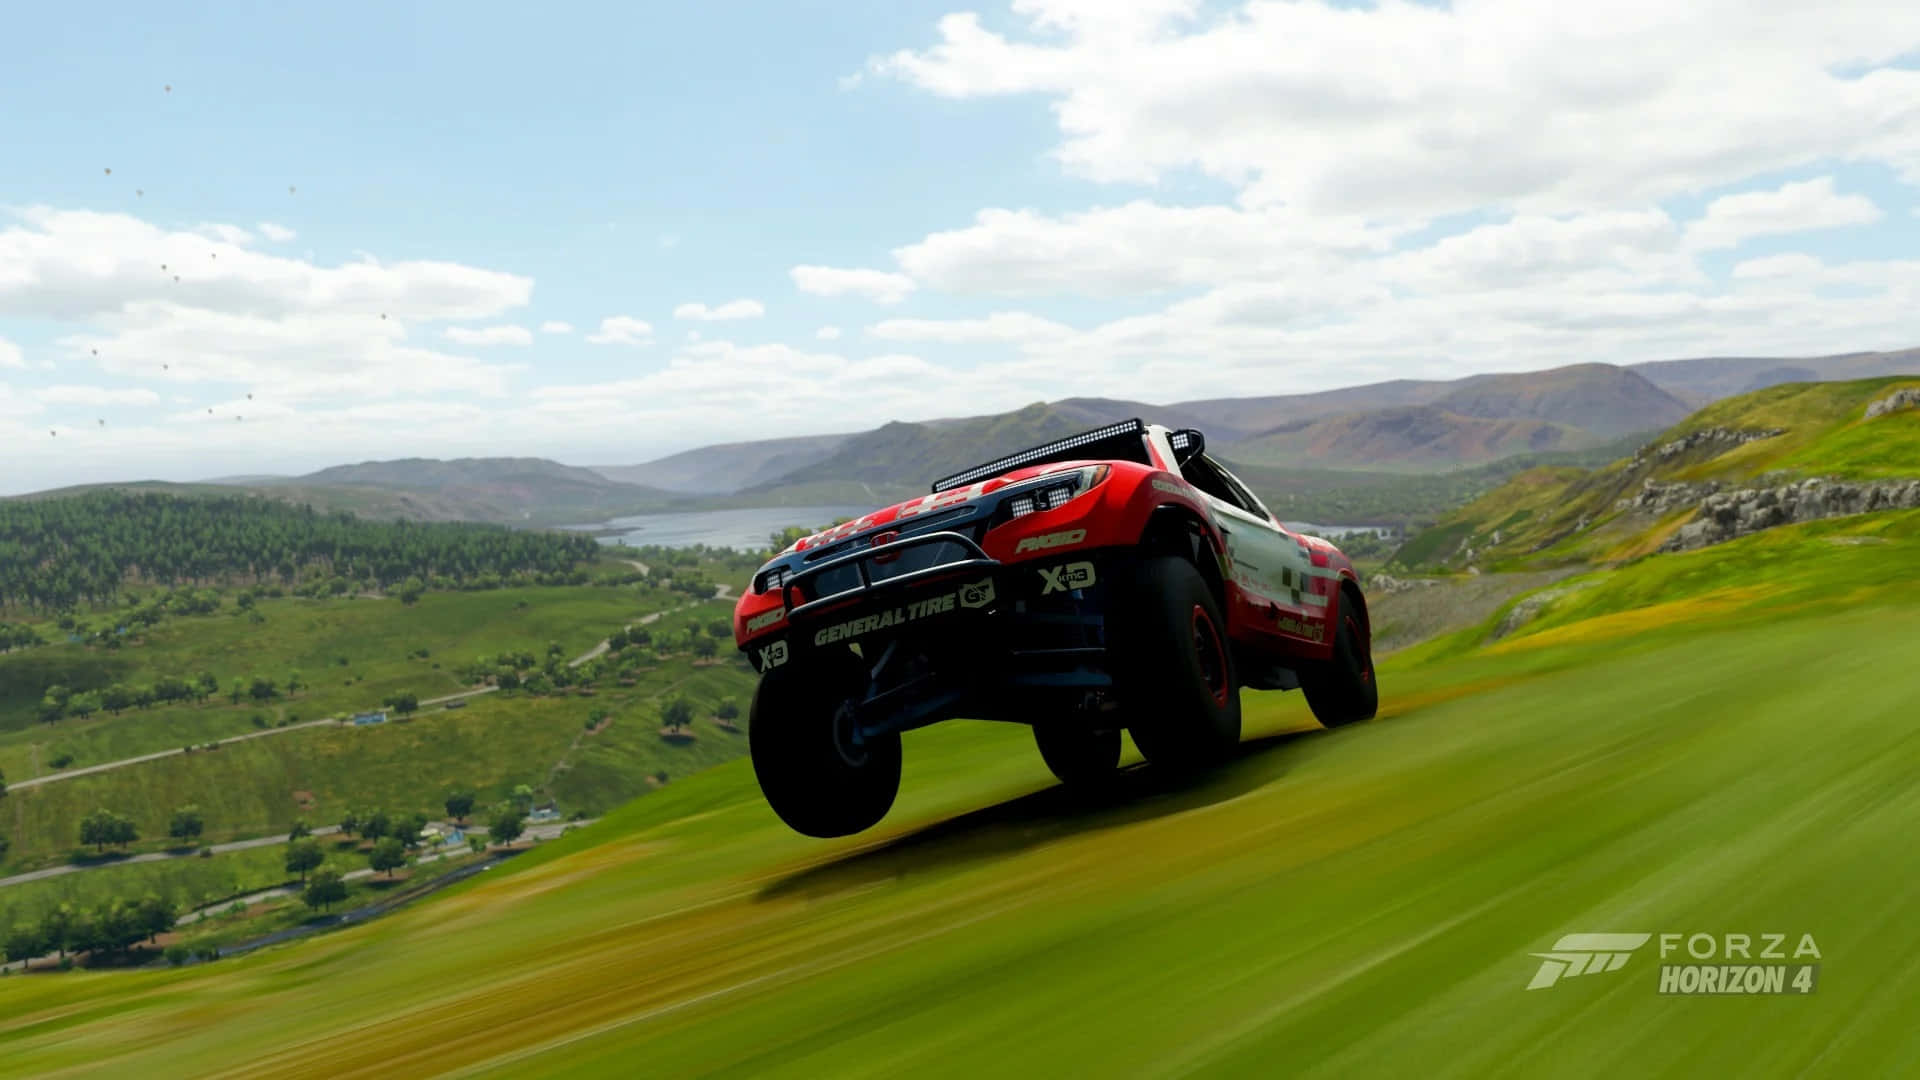 “Experience the Thrill of the Open Road in Forza Horizon 4”